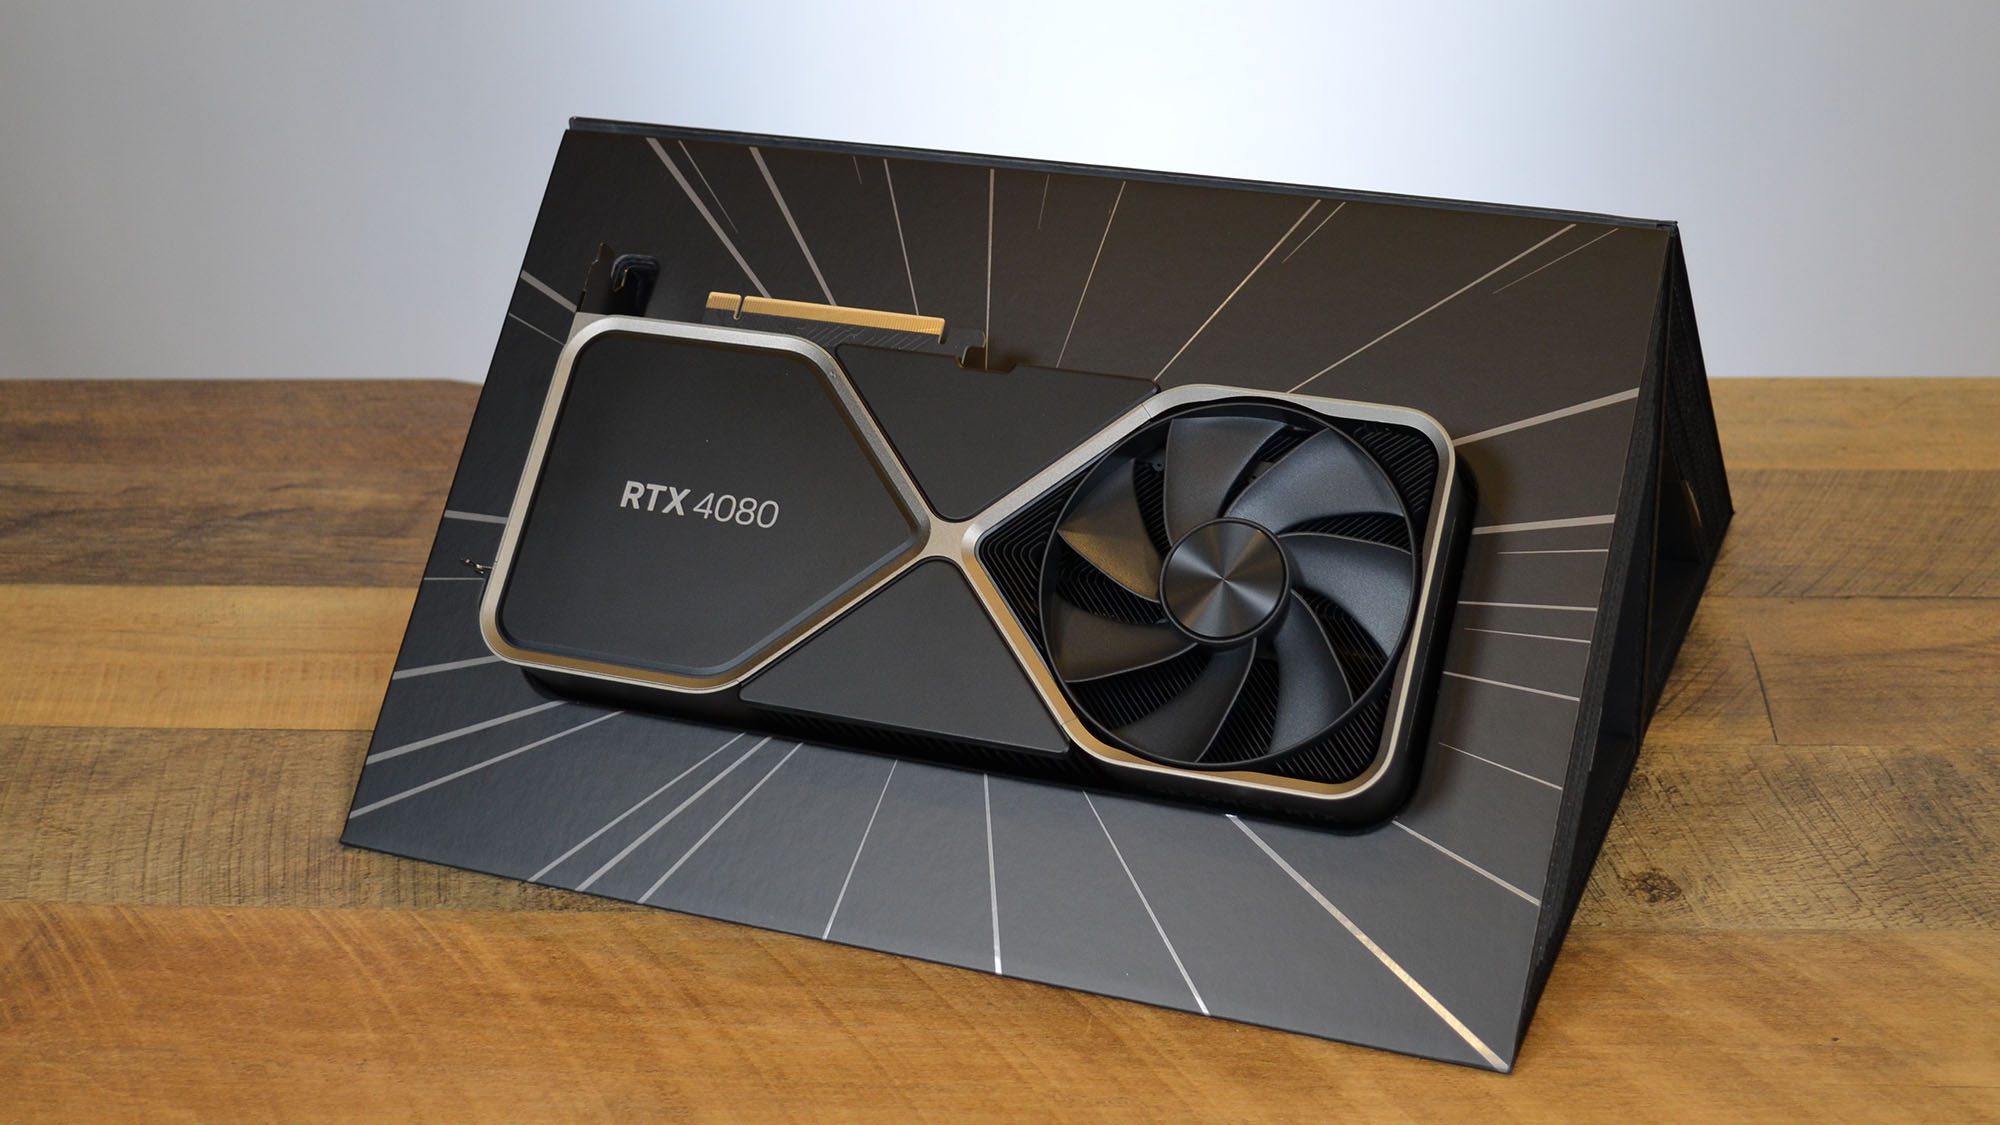 Nvidia GeForce RTX 4080 on a wooden desk in front of a white board